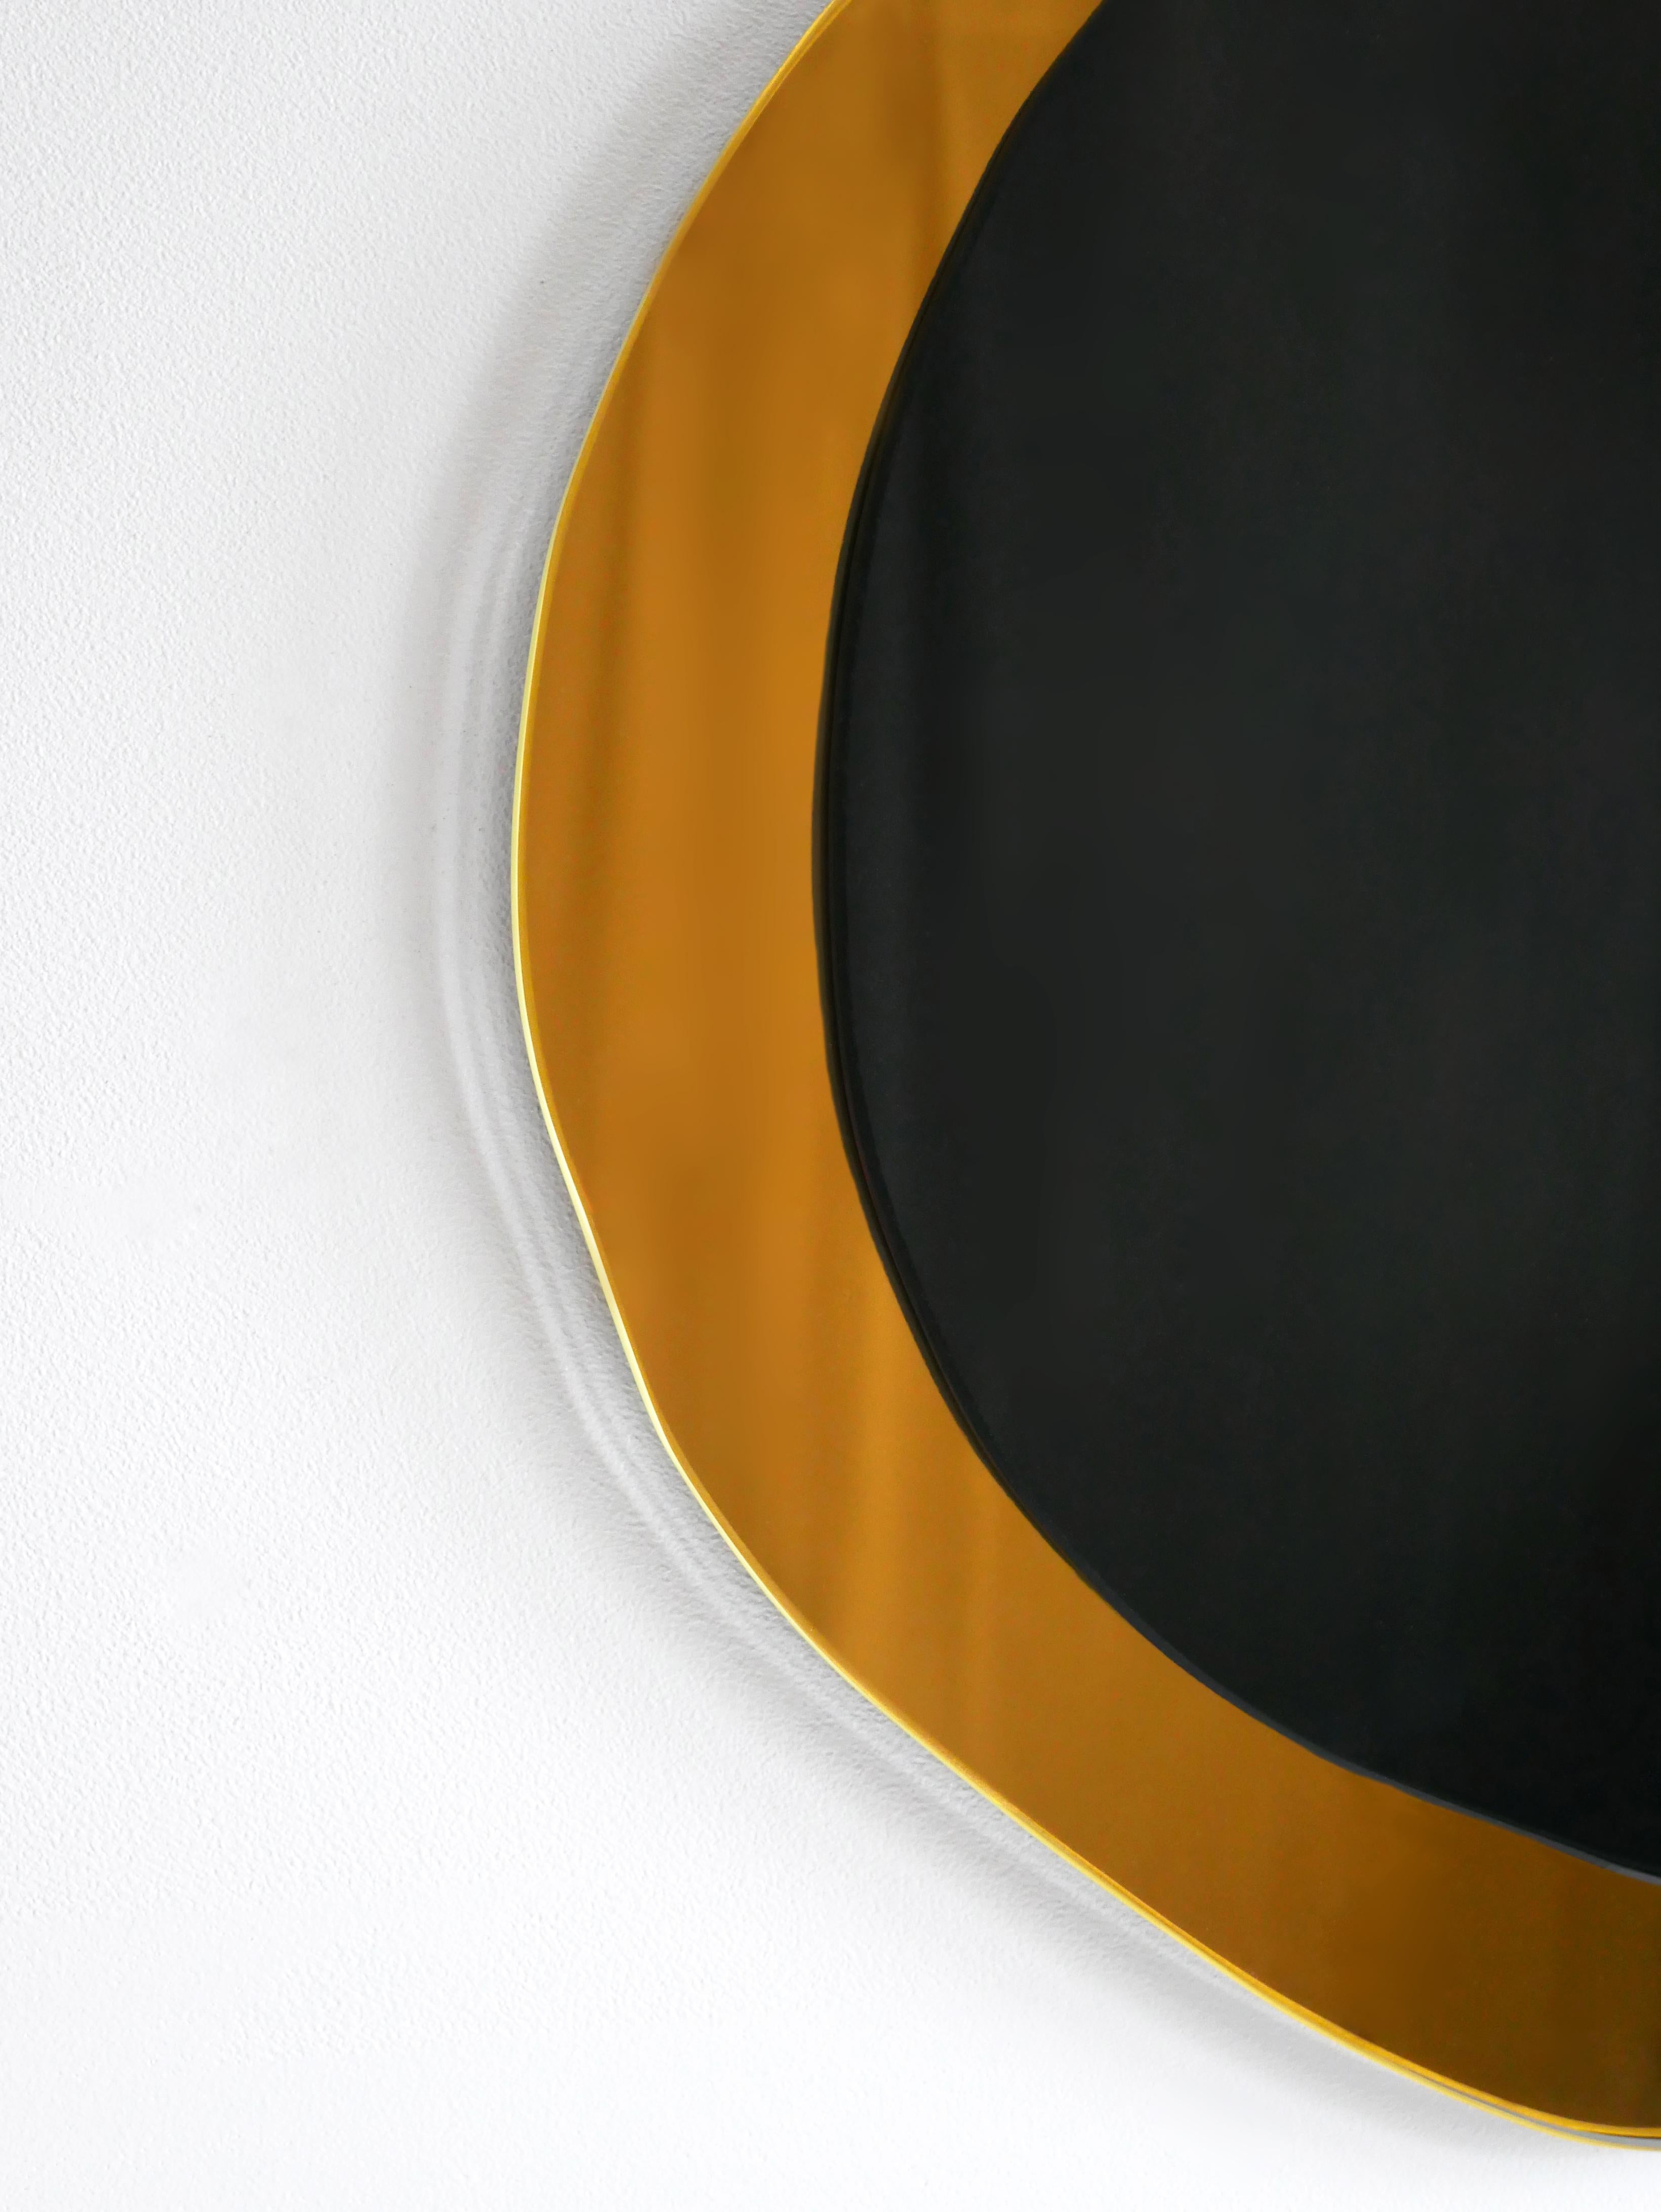 Dark Eclipse small hand-sculpted mirror, Laurene Guarneri
Limited edition.
Handmade.
Materials: Gold colored mirror, dark colored mirror.
Dimensions: 40 x 40 cm

Laurène Guarneri is a designer based in Paris.
Graduated in master's degree from